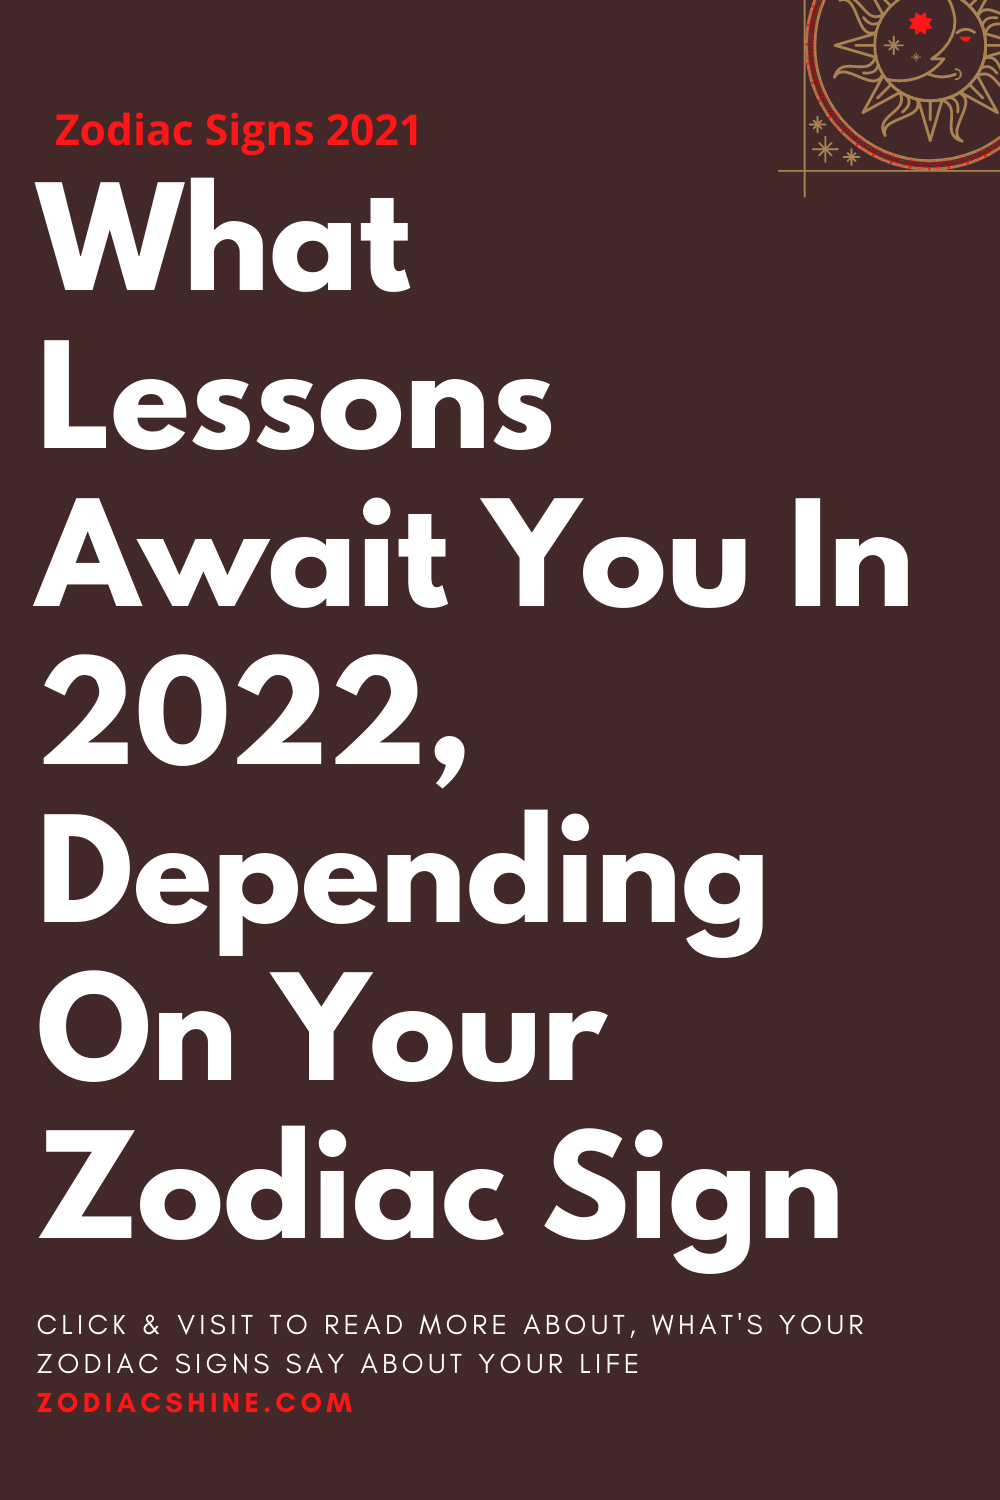 What Lessons Await You In 2022, Depending On Your Zodiac Sign